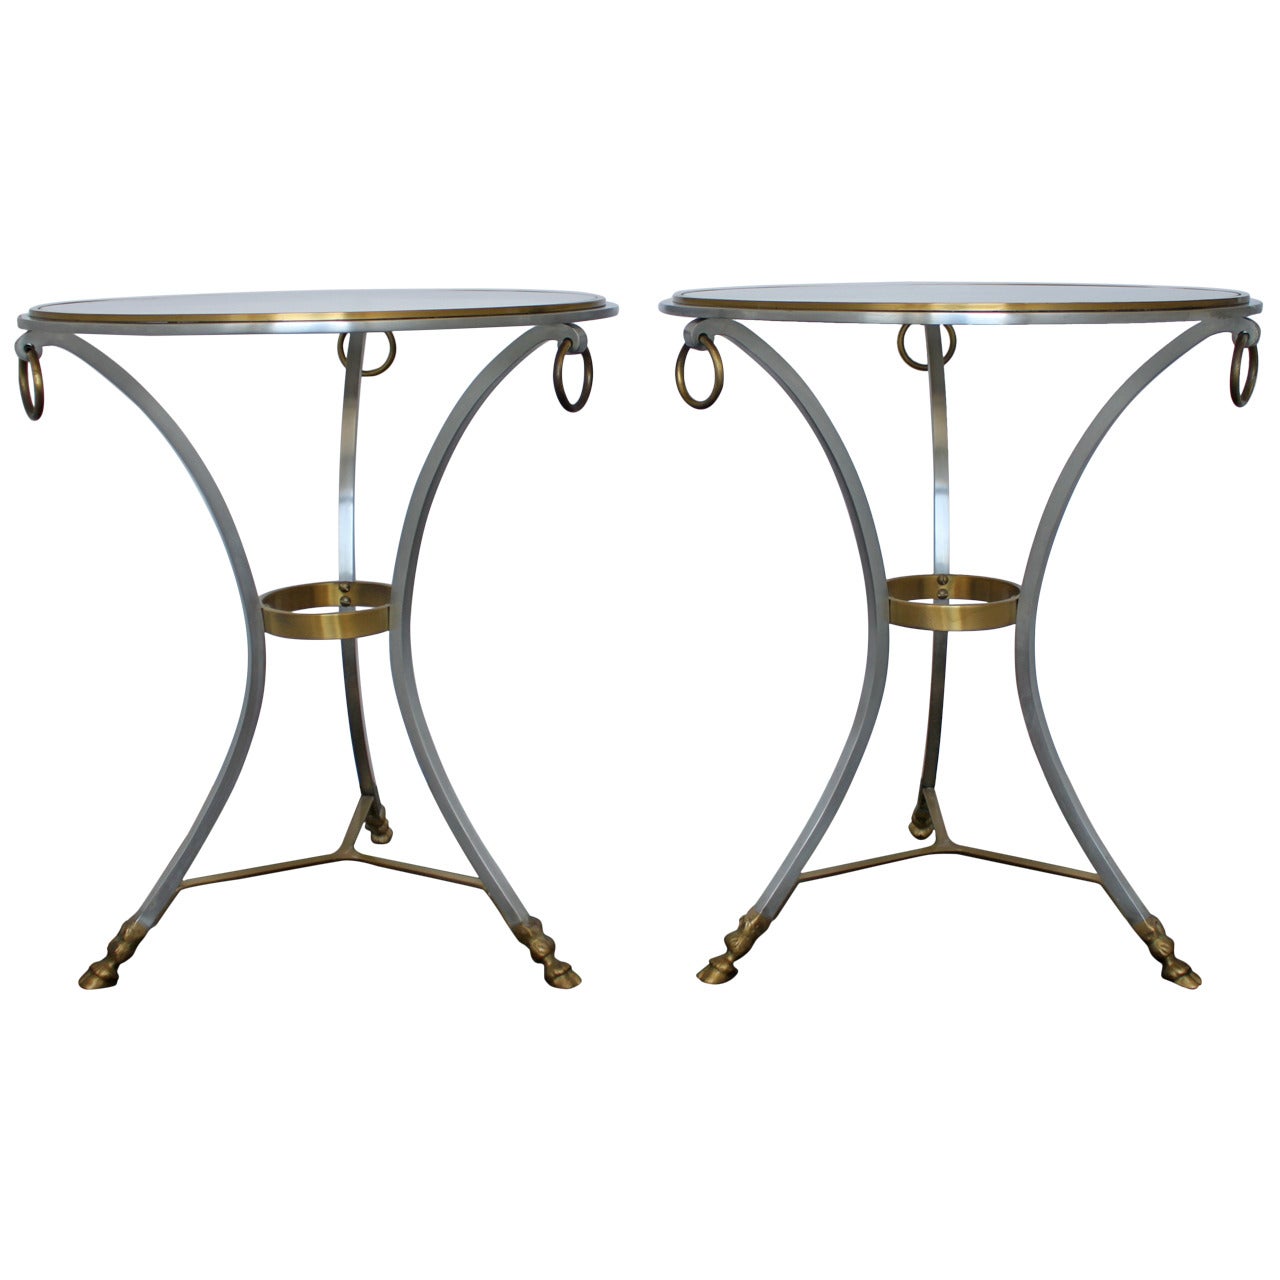 Pair of Steel and Bronze Gueridon Tables in the Style of Maison Jansen